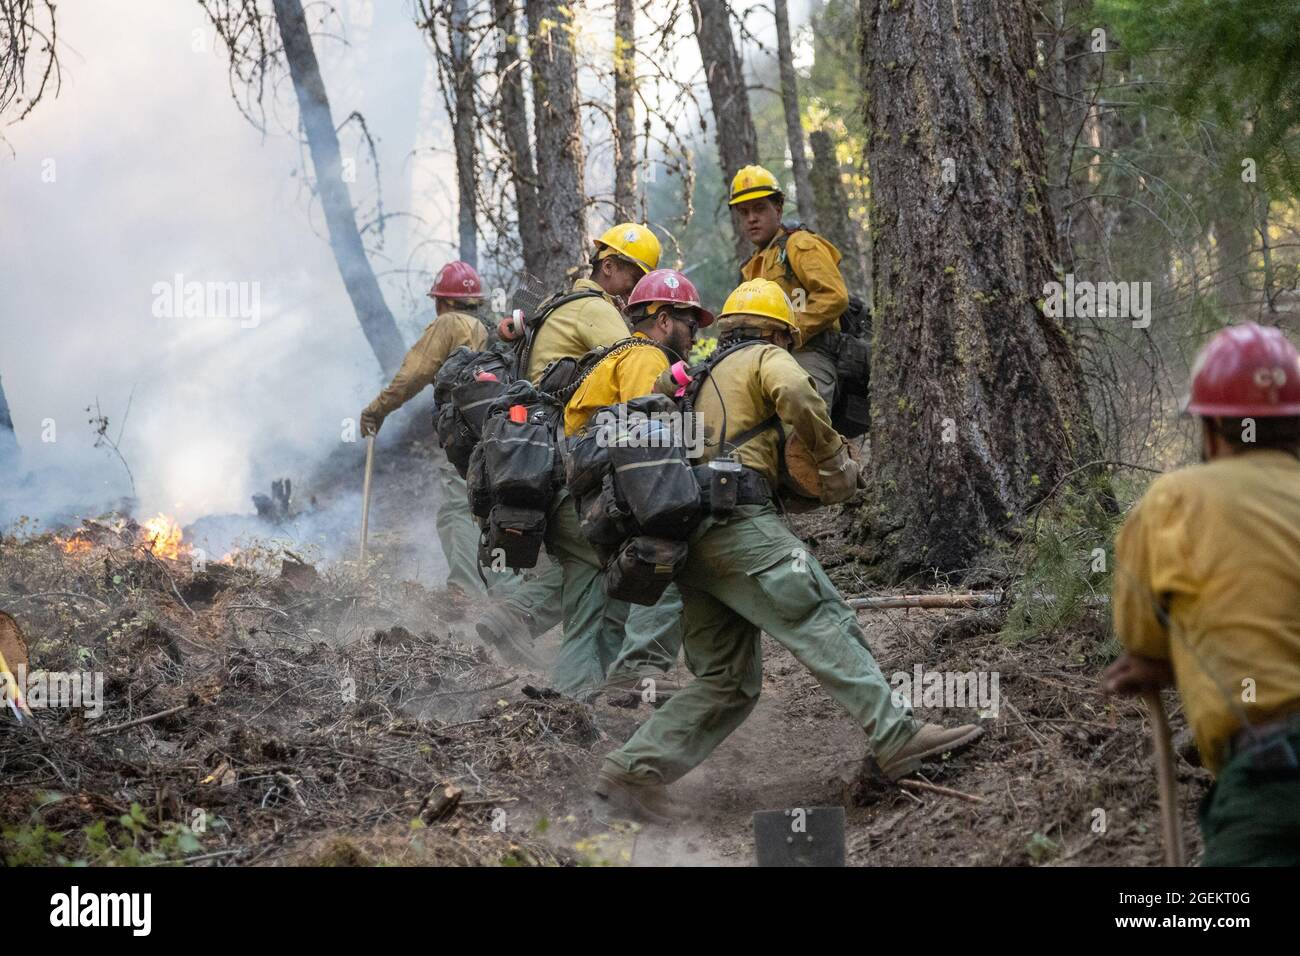 Greenville, USA. 20th Aug, 2021. Firefighters work in an area hit by the Dixie Fire near Greenville town in Northern California, the United States, on Aug. 19, 2021. The Dixie Fire has burned more than 700,000 acres as of Friday afternoon in remote Northern California. Credit: Dong Xudong/Xinhua/Alamy Live News Stock Photo